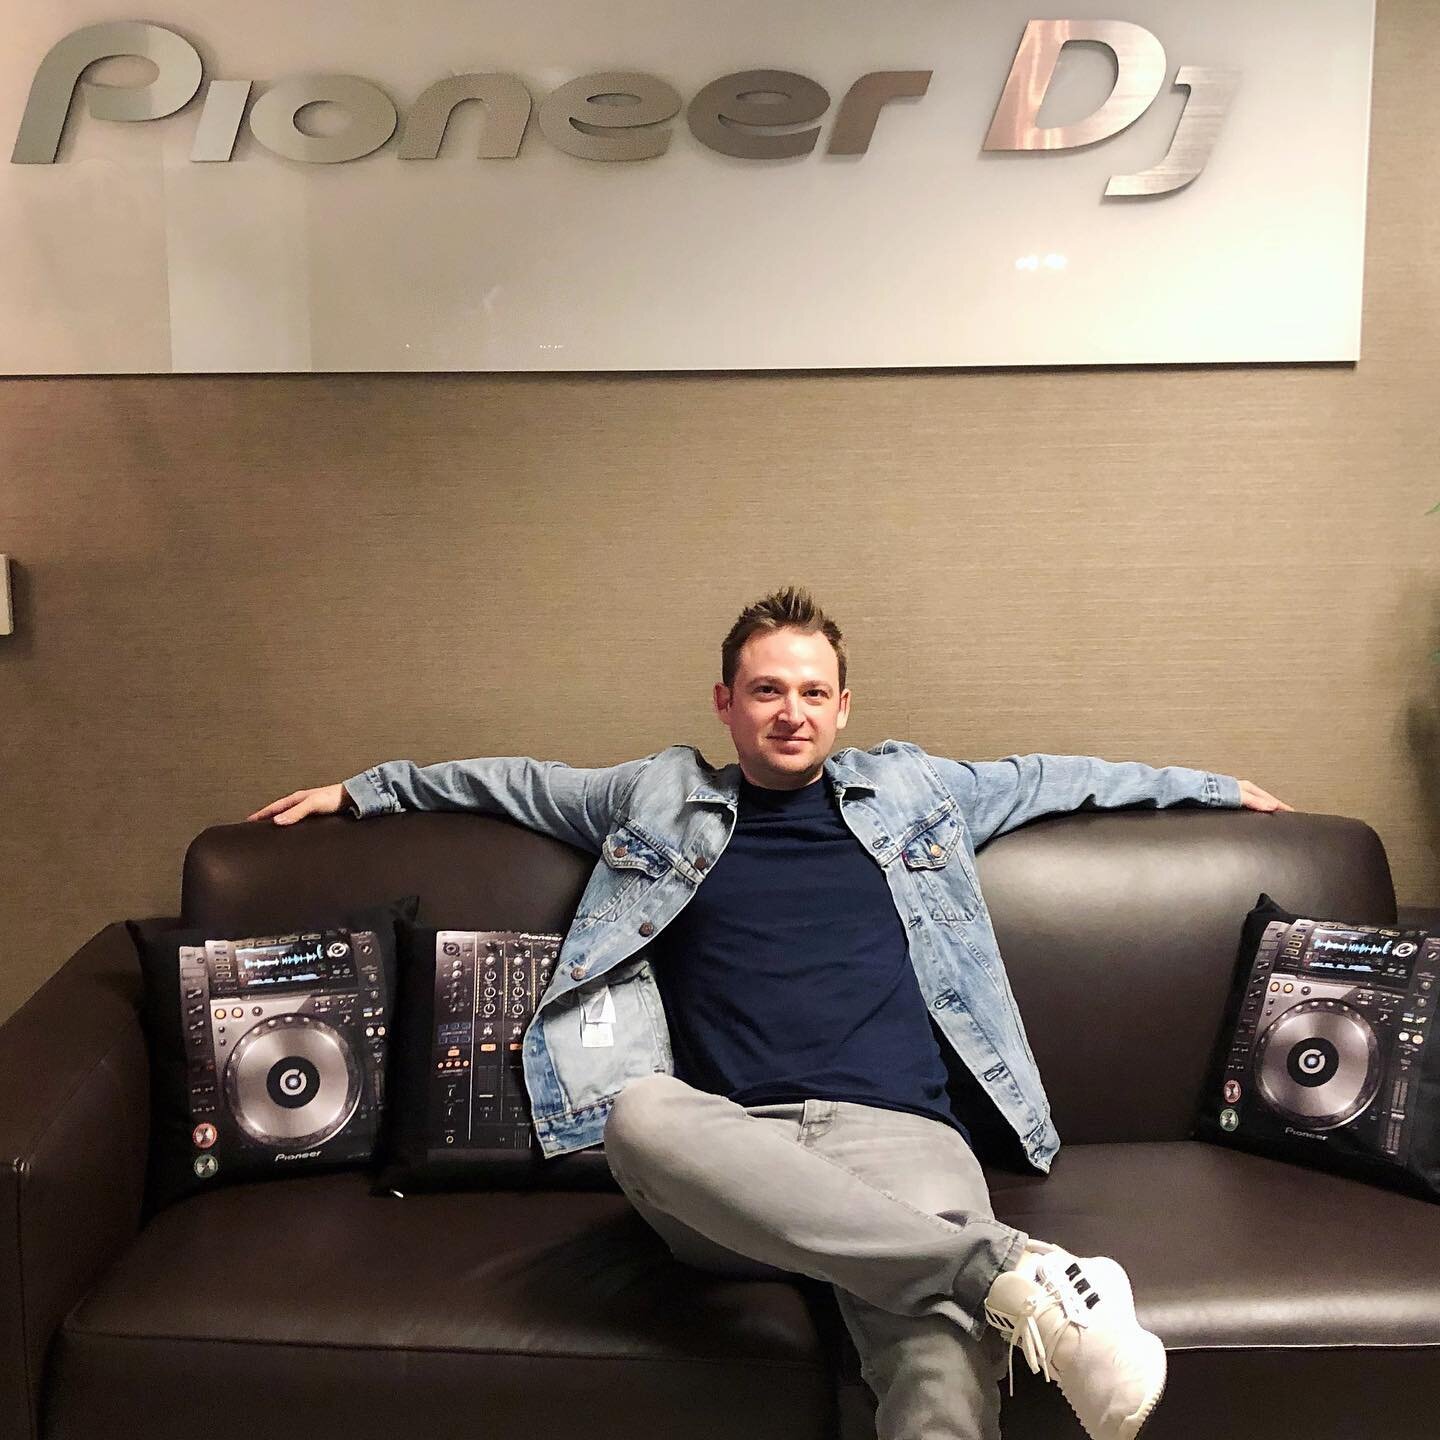 5 years ago today, I worked my very first project with Pioneer DJ USA! What started out as a simple demo of the DDJ-SX2 at a regional dealer has grown into so much more. I&rsquo;m honored to play a small part within the global team that make this com